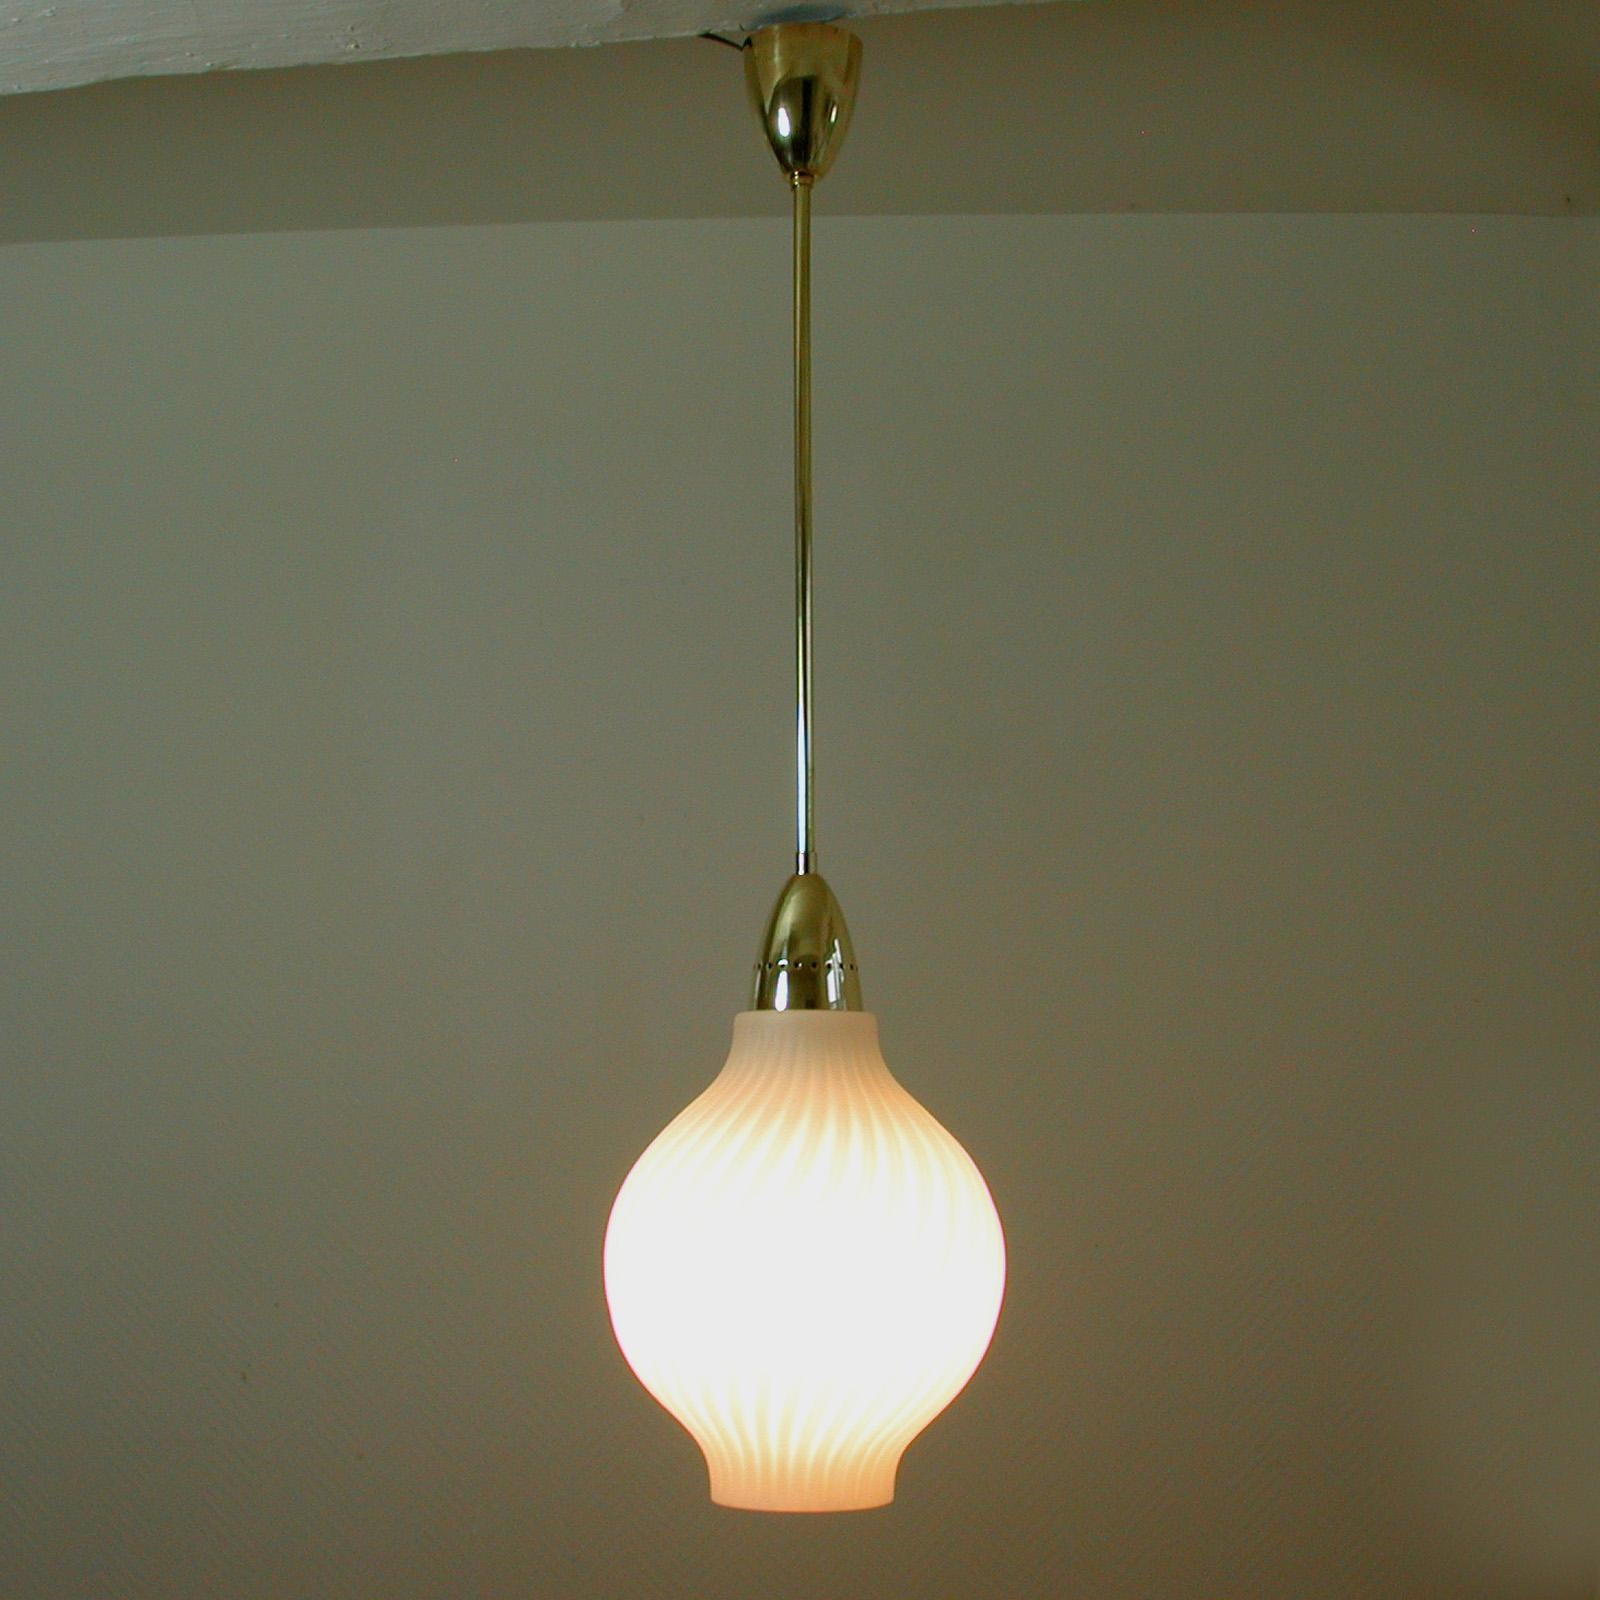 Mid-20th Century Italian Brass and Satin Opaline Glass Pendant Attributed to Arredoluce, 1950s For Sale